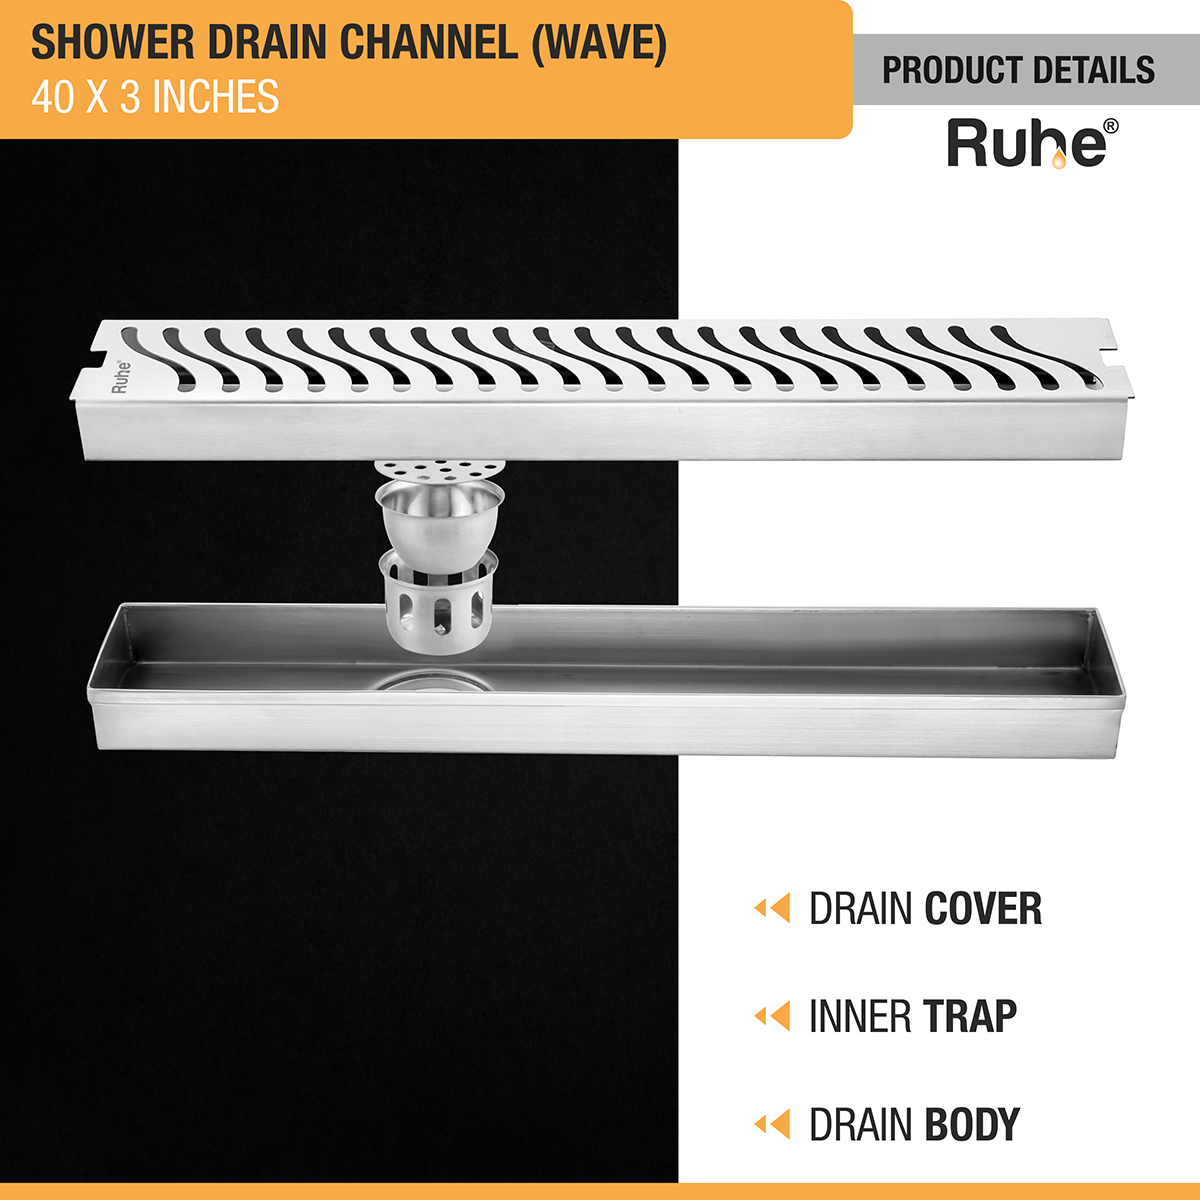 Wave Shower Drain Channel (40 X 3 Inches) with Cockroach Trap (304 Grade) product details